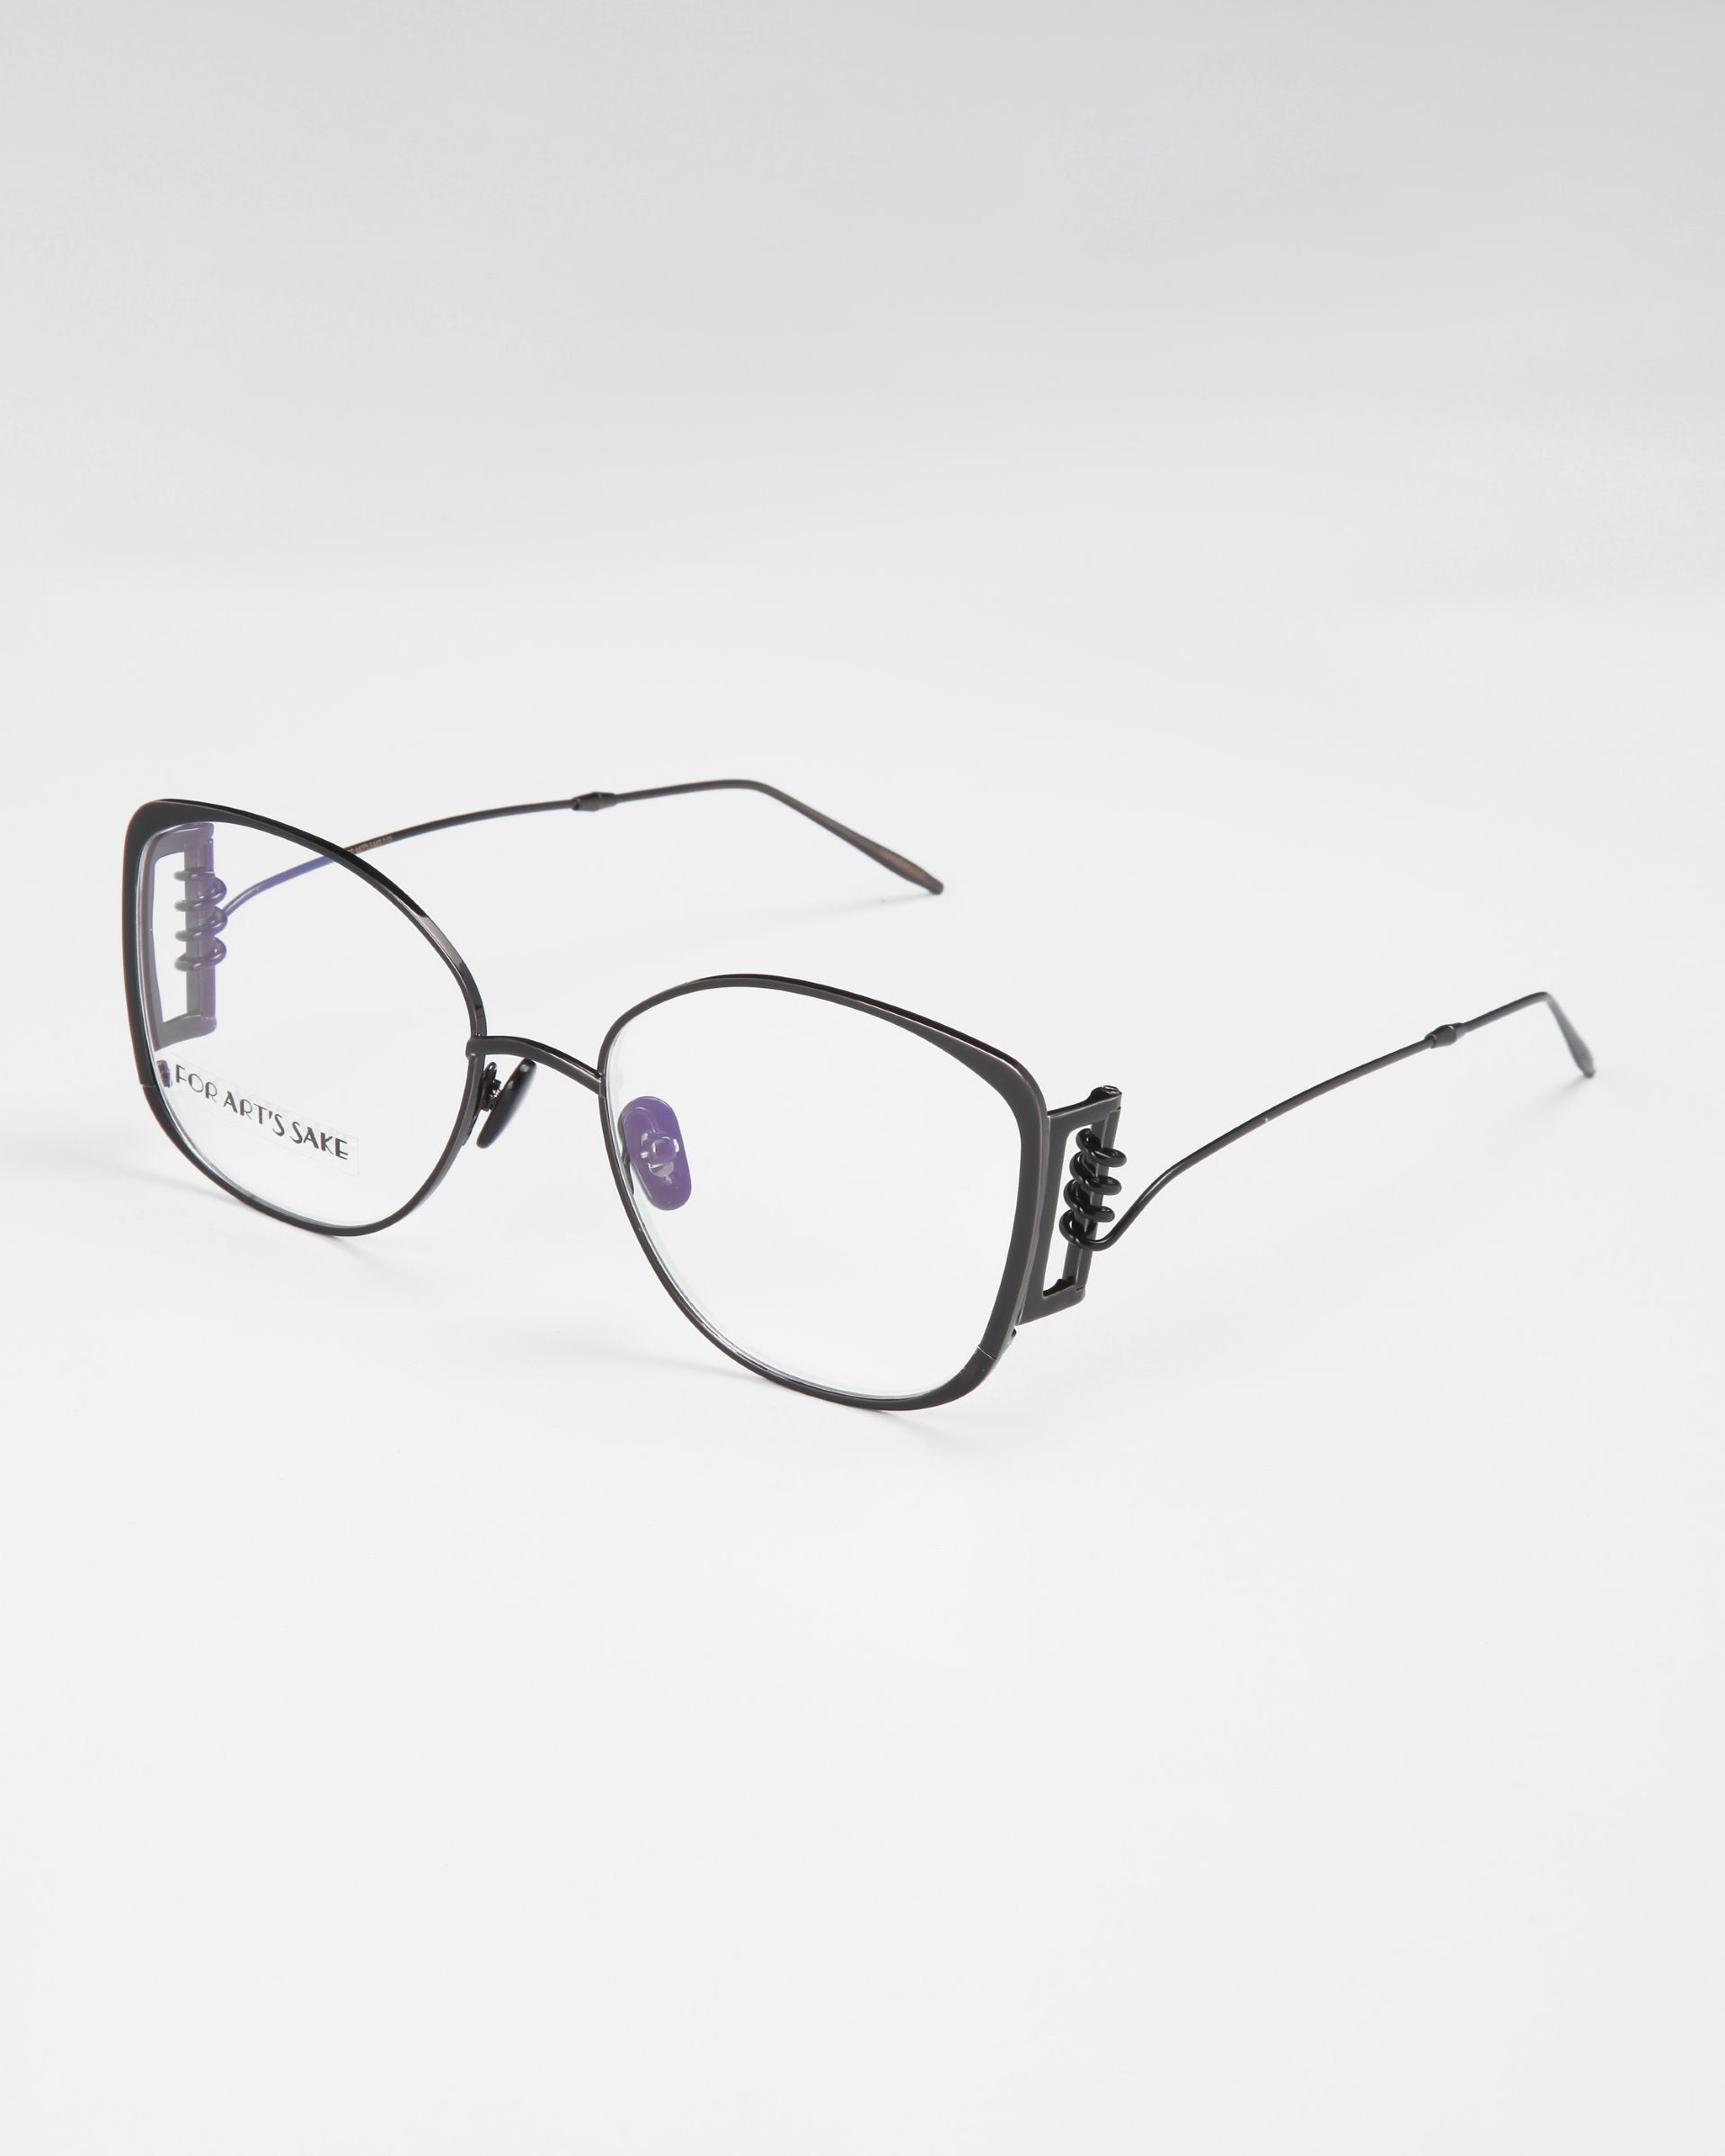 A pair of For Art&#39;s Sake® Jupiter black metal eyeglasses with large square lenses sits on a white surface. The frame has thin arms and a slight double bridge design with a small decorative element near the hinges. Featuring blue light filters, the lenses are clear, and the overall design is minimalistic yet stylish.